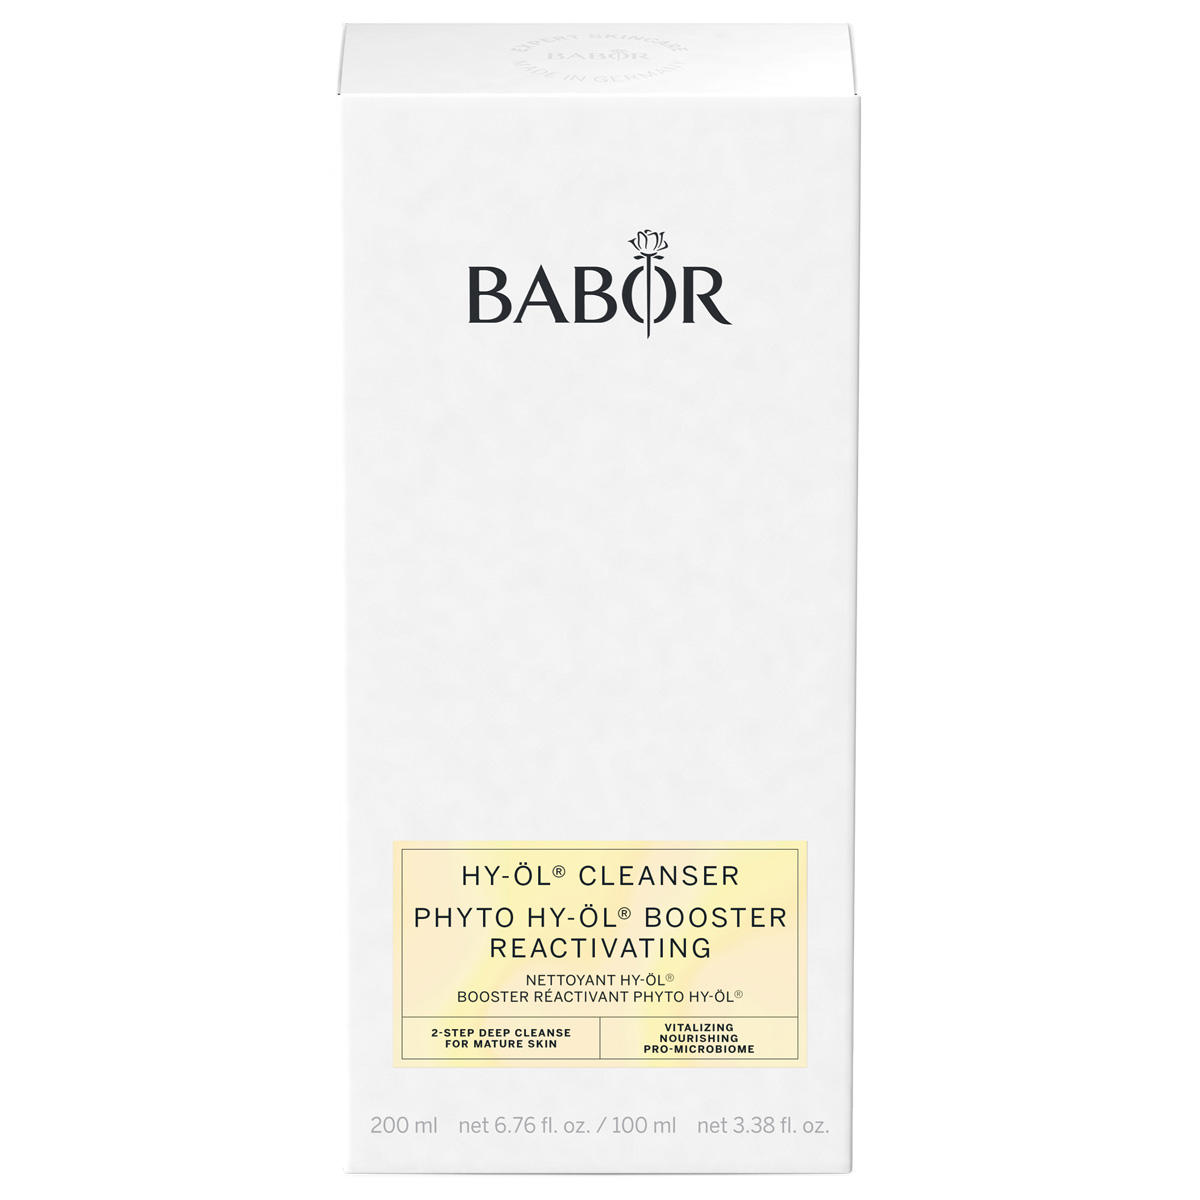 BABOR CLEANSING HY-ÖL & Phyto HY-ÖL Booster Reactivating Set  - 1